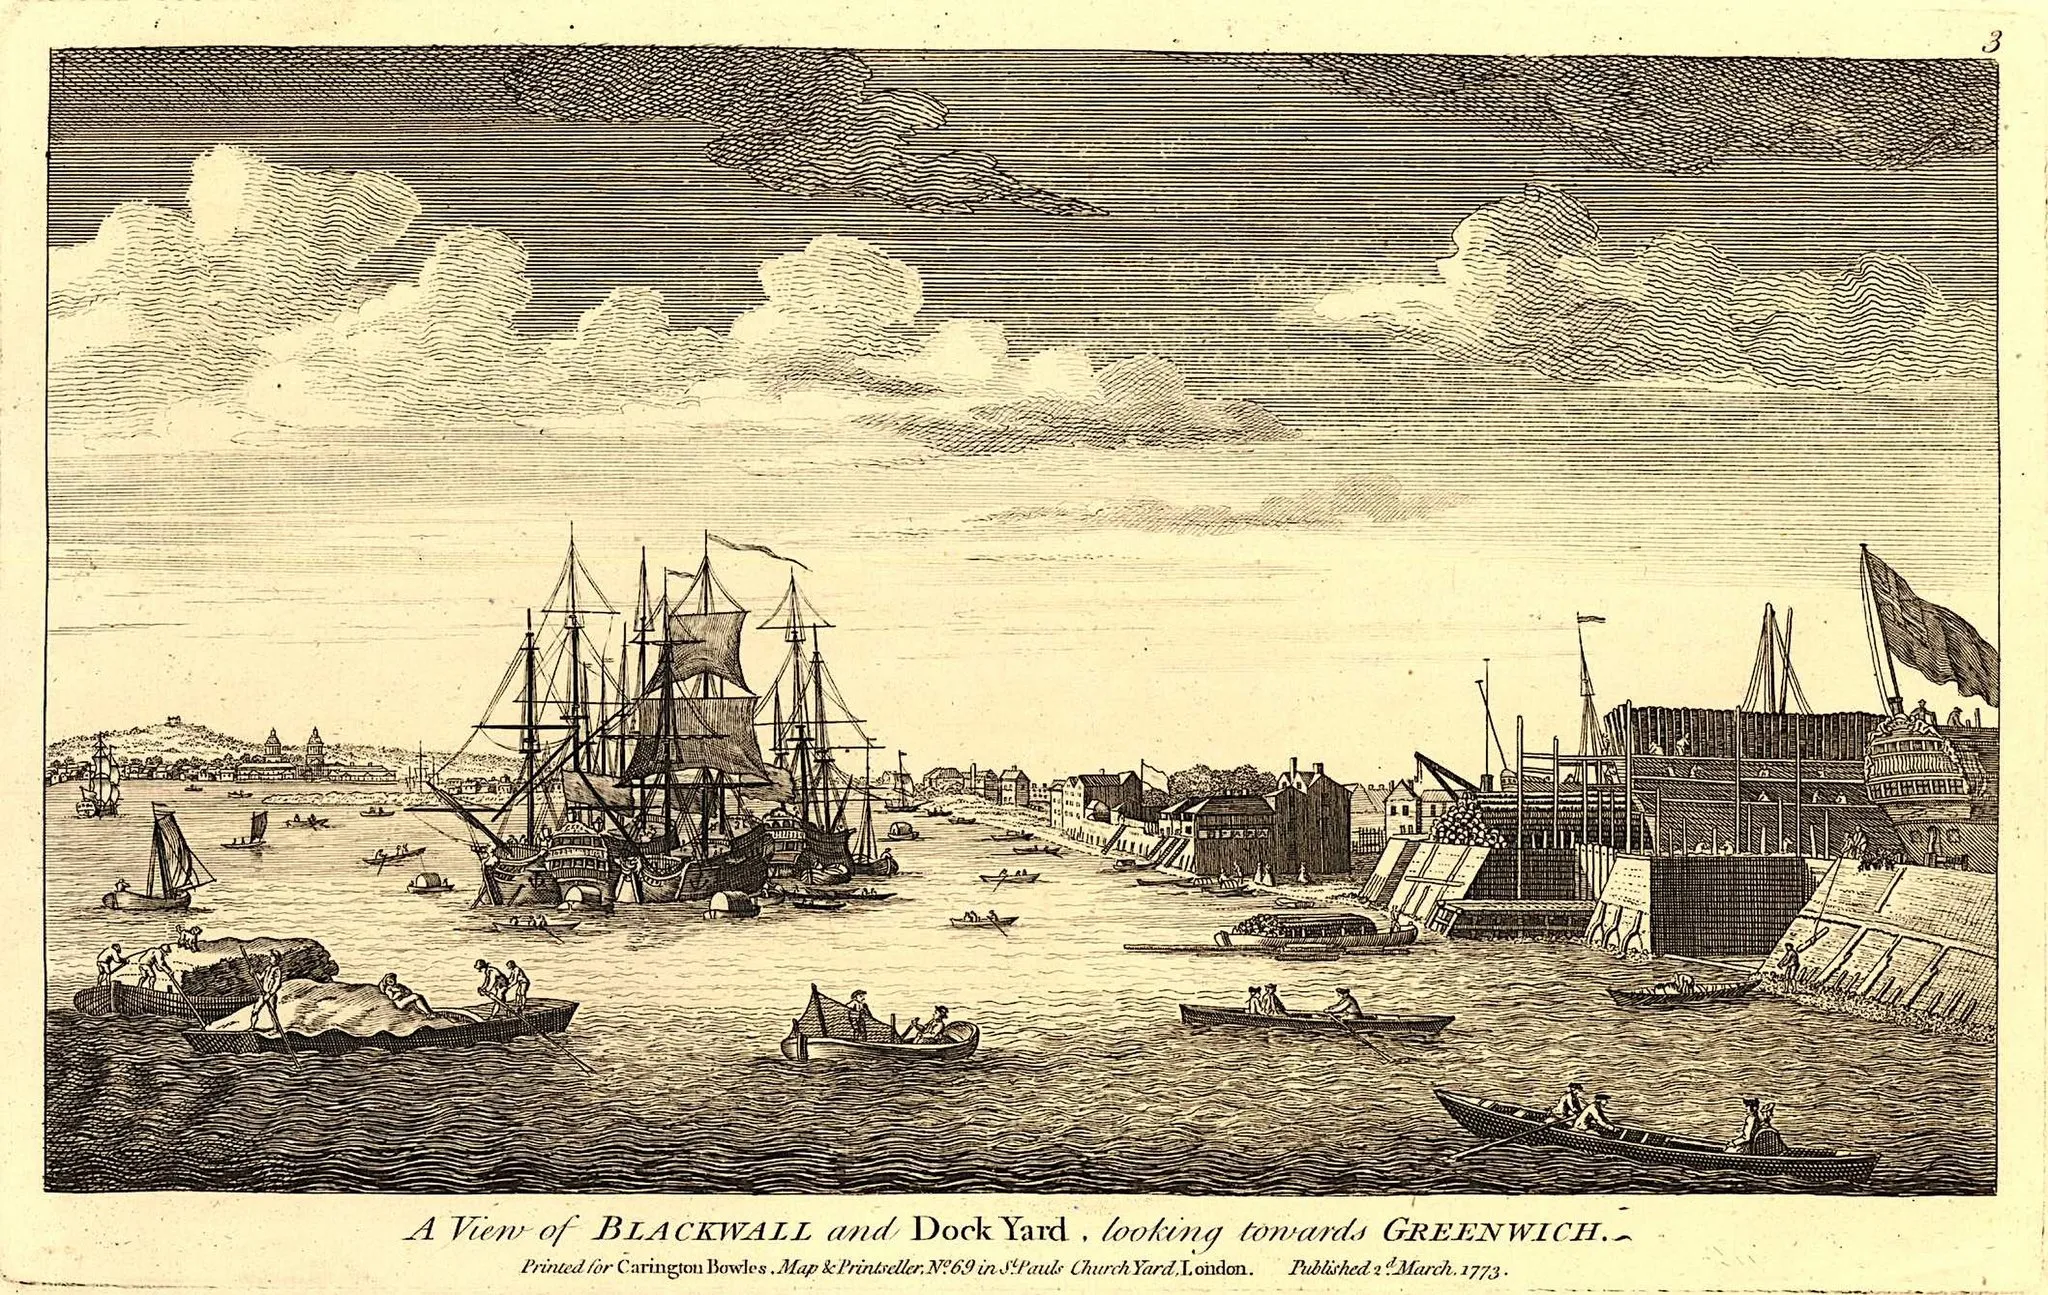 Photo showing: A View of Blackwall and Dock Yard, looking towards Greenwich.  Etching and engraving.
Blackwall Yard was famous for building East Indiamen, which vessels were often called Blackwallers.  Built in 1614, it was the first wet dock in the port of London.